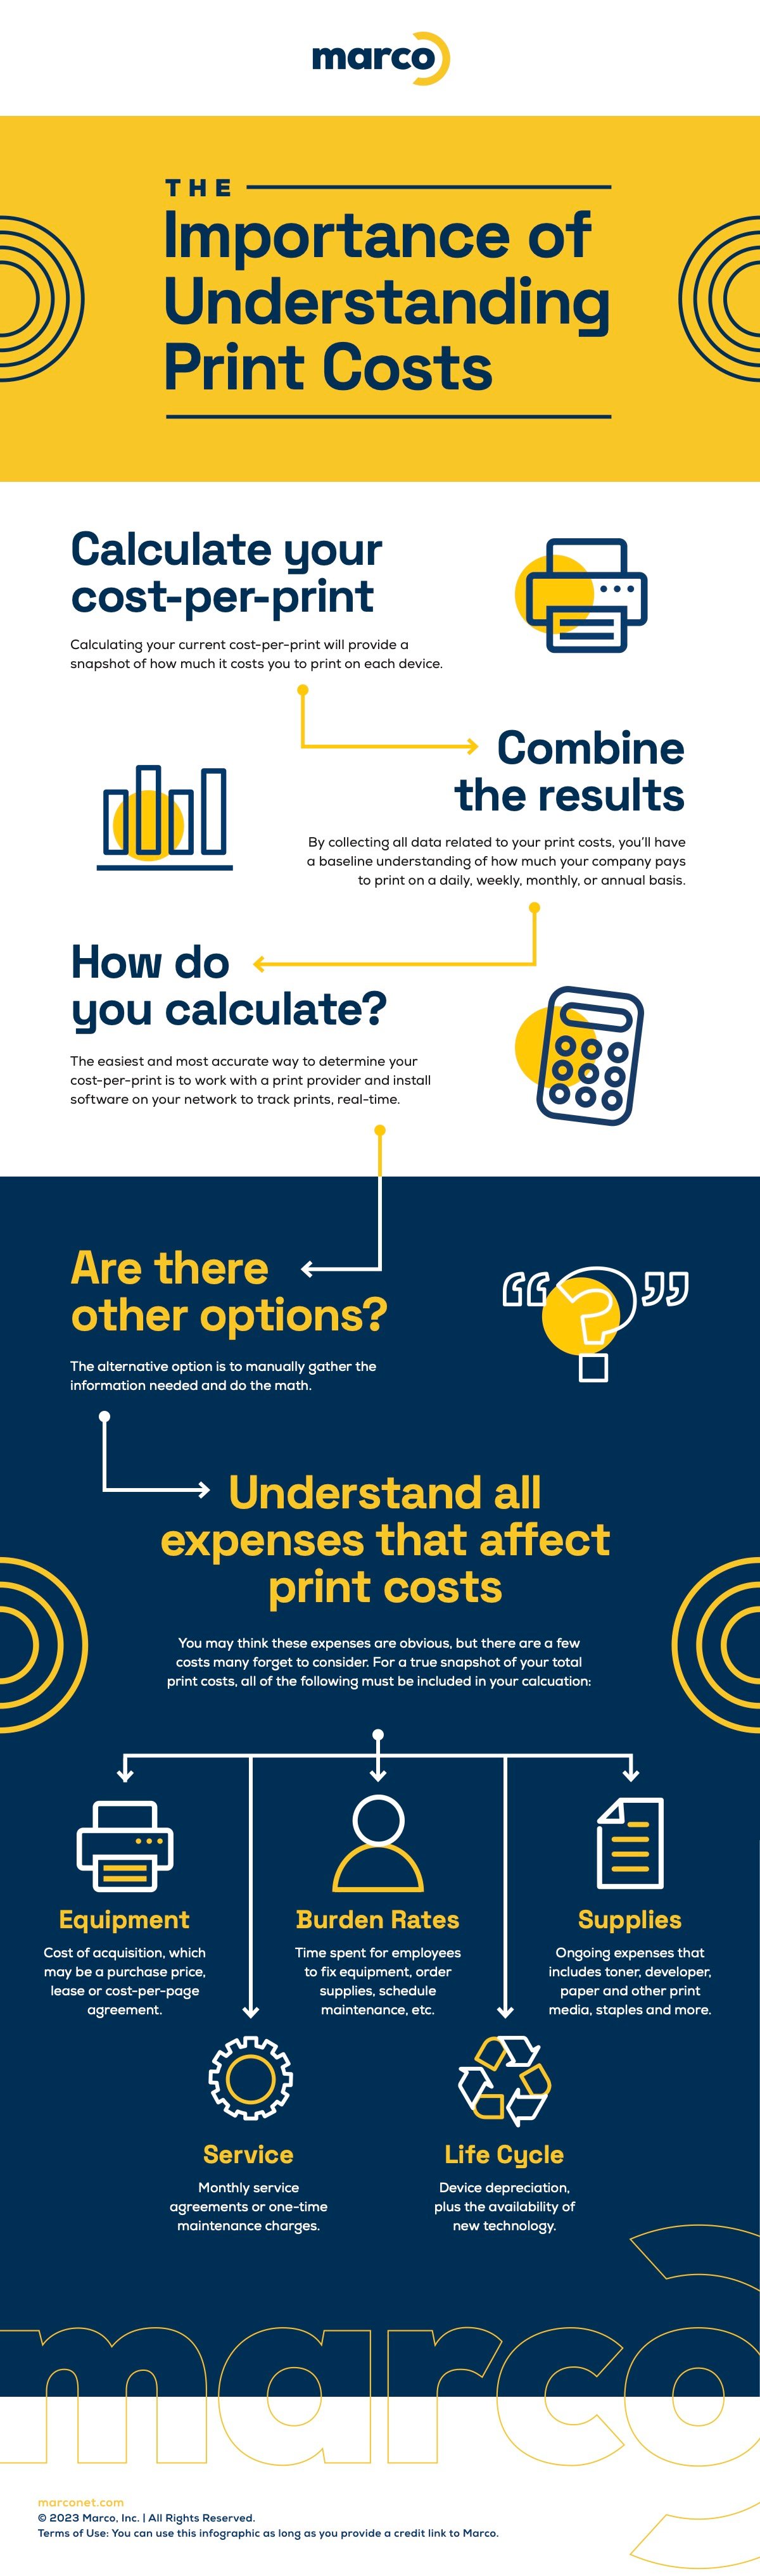 Marco_Print_Cost_Infographic 